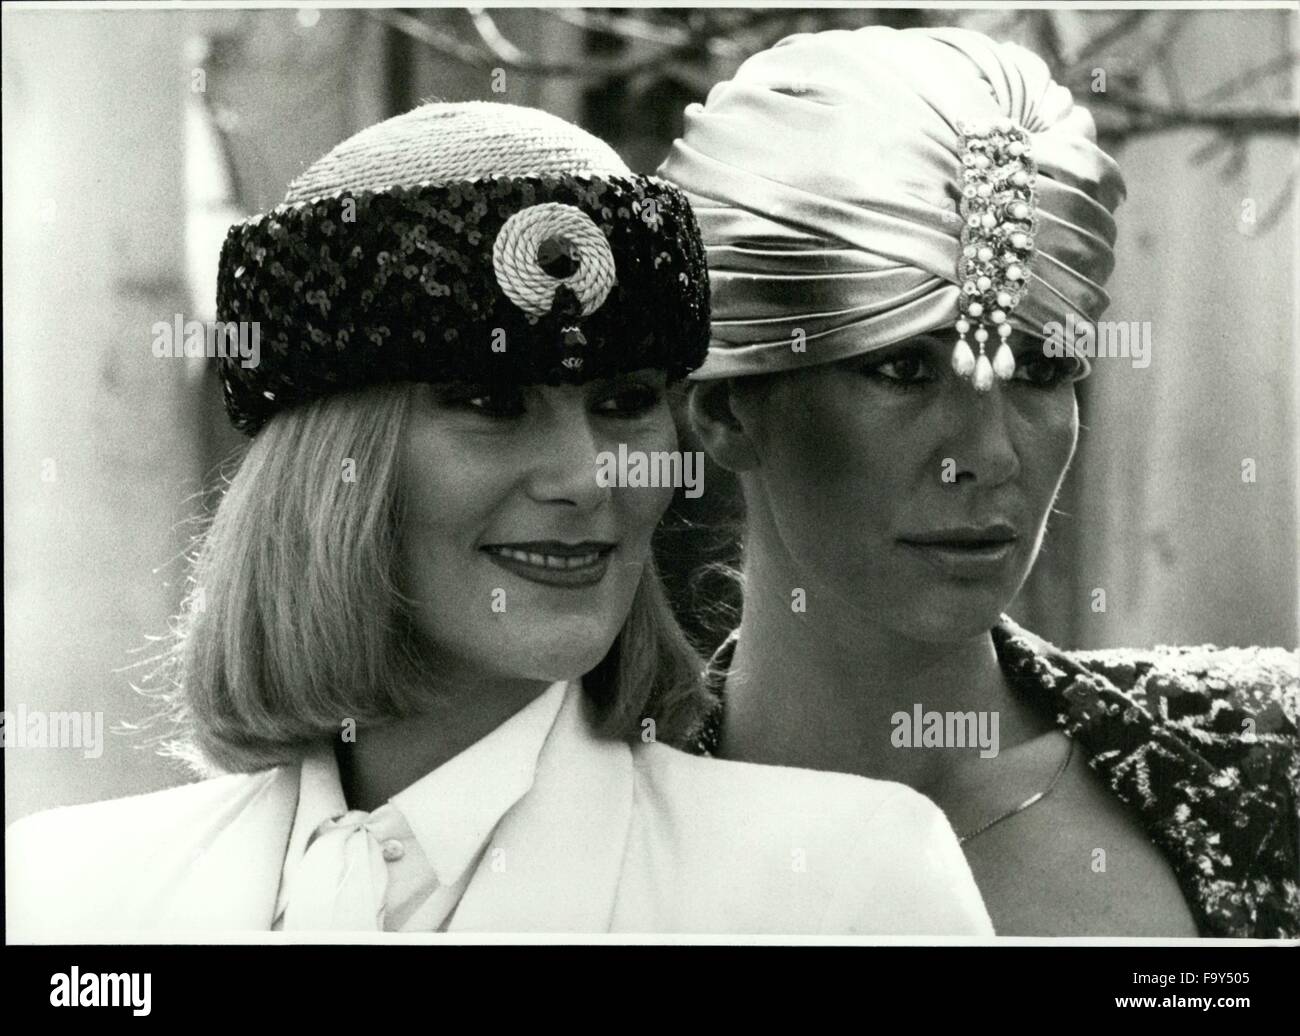 1974 - New Fashion Of Hats Shown In Munich/West Germany. These elegant hats.glinting and glittering, are calling attention to their female wearers. They can wear them in the evening. Here are two models out of the new collection of fashion of hats introduced by the ''working group hat'' in Munich now. At the left, there is a cap bordered with cords and pailletts, and at the right, there is a turban, looking like one of a maharajah and made of white satin-silk. It's also trimed with pailletts and pearls. © Keystone Pictures USA/ZUMAPRESS.com/Alamy Live News Stock Photo